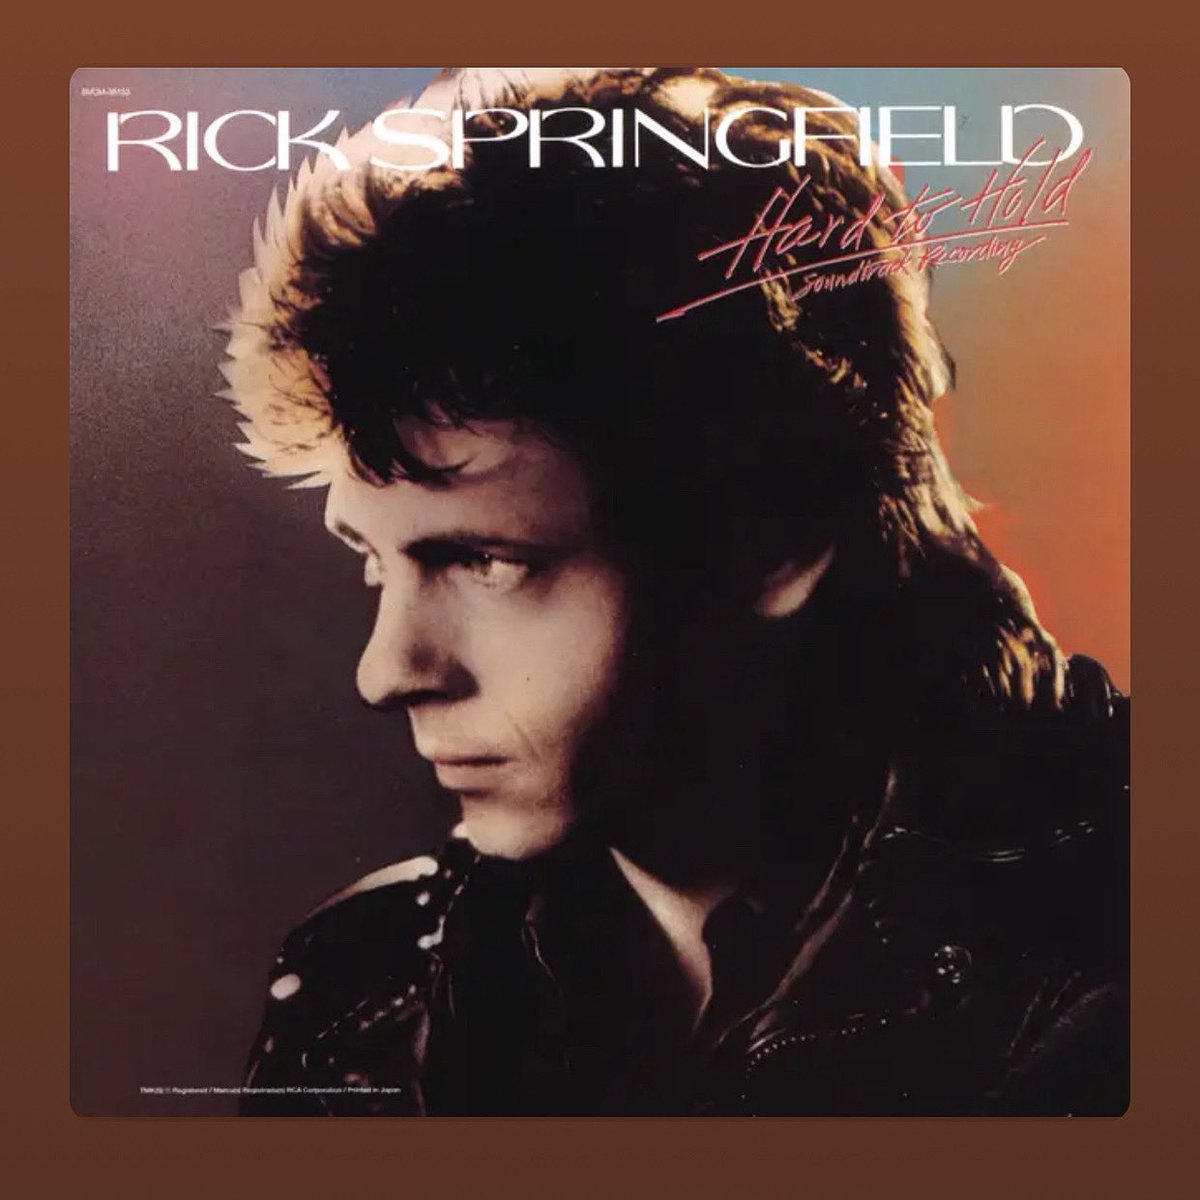 Rick Springfield, Hard To Hold. #19 40 years ago this week on the Billboard album chart. Peaking at #16. #music #40yearsago #billboard #us #rickspringfield #hardtohold #soundtrack #randycrawford #grahamparker #nonahendryx #petergabriel